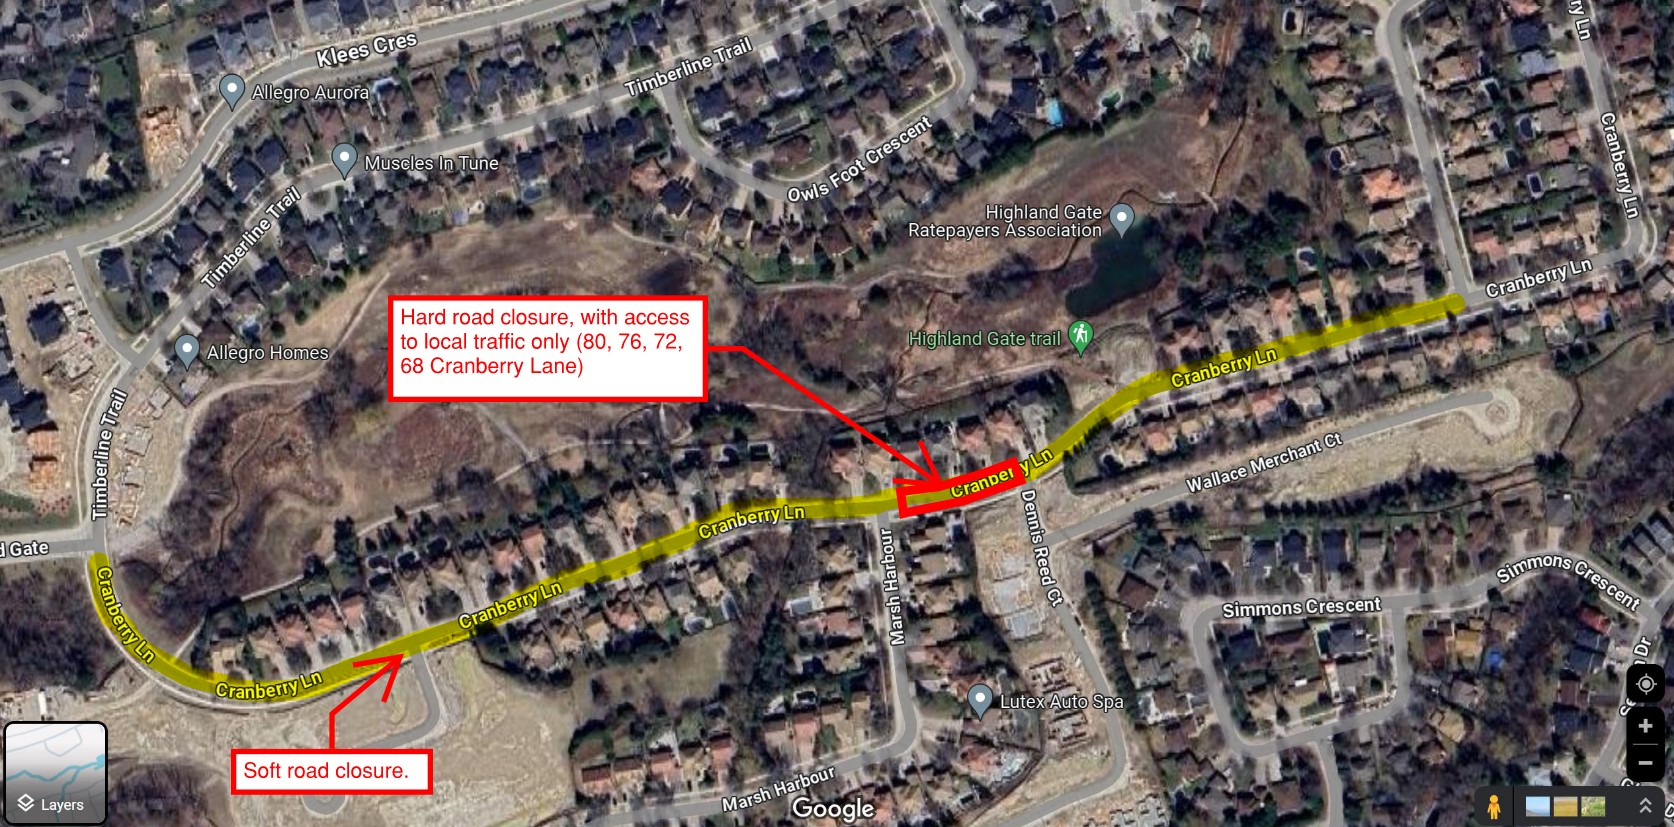 Google map showing a yellow line over Cranberry Ln, and road closure area between Dennis Reed Ct and Marsh Harbour